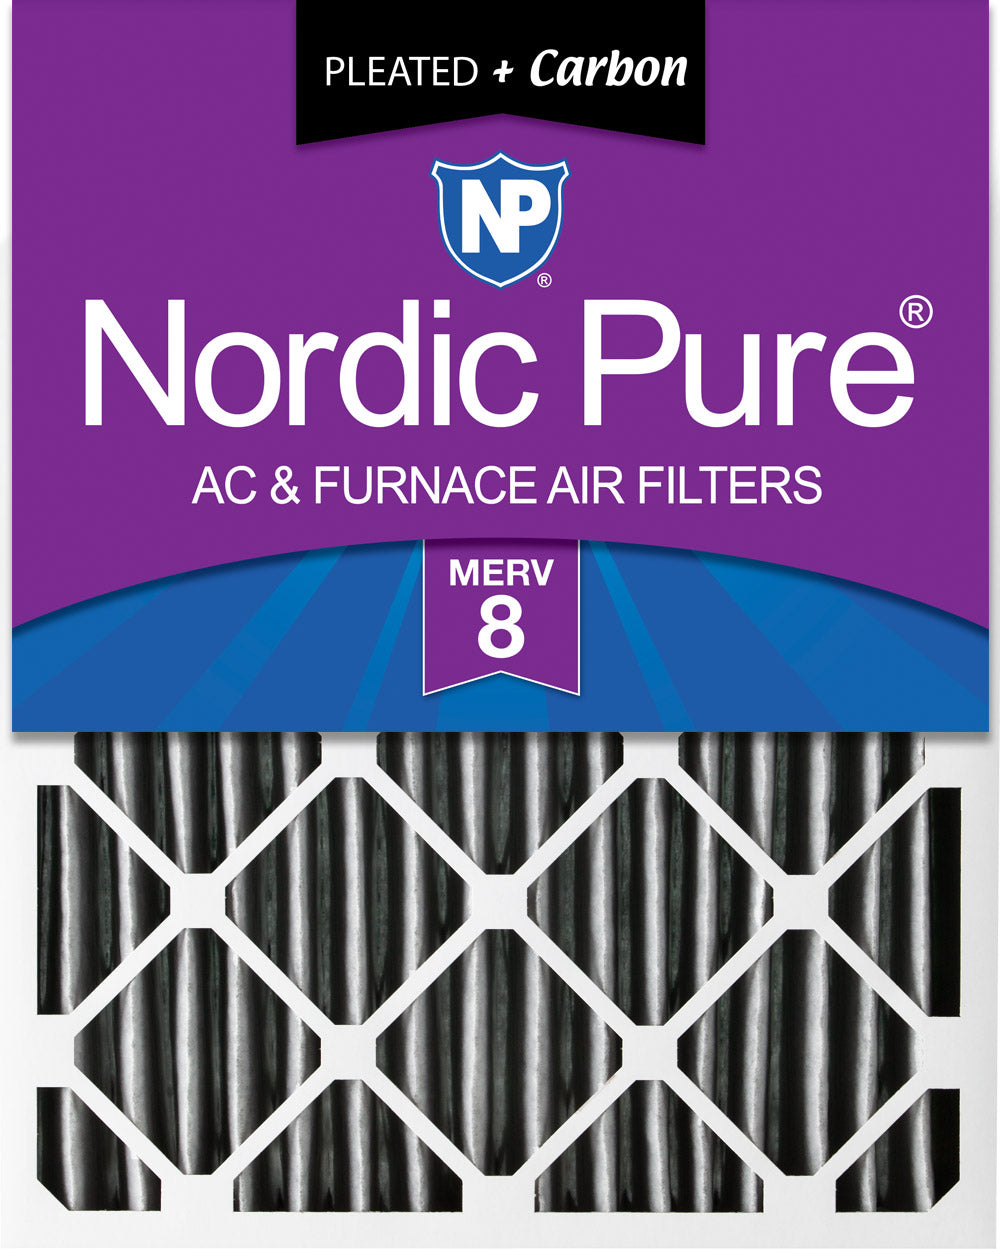 16x25x4 (3 5/8) Furnace Air Filters MERV 8 Pleated Plus Carbon